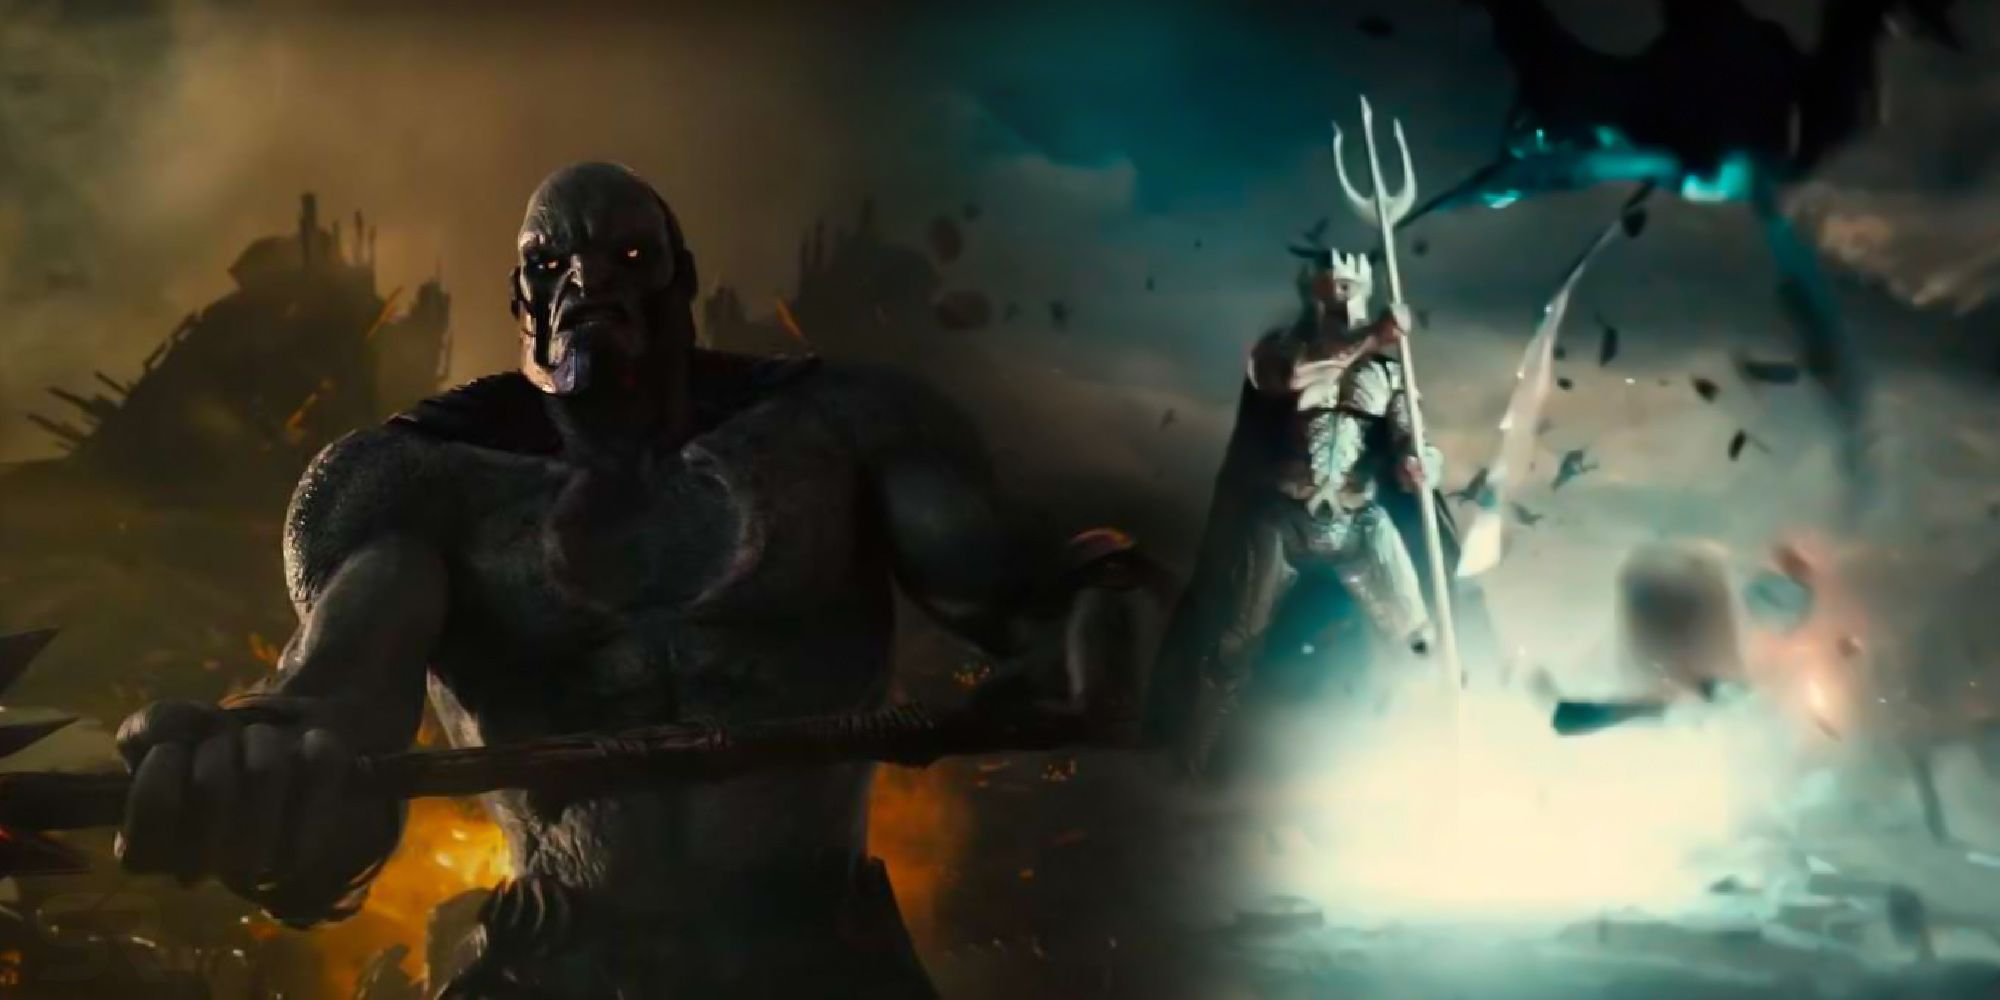 Justice League: All About The Fight Between Atlanteans and Parademons.